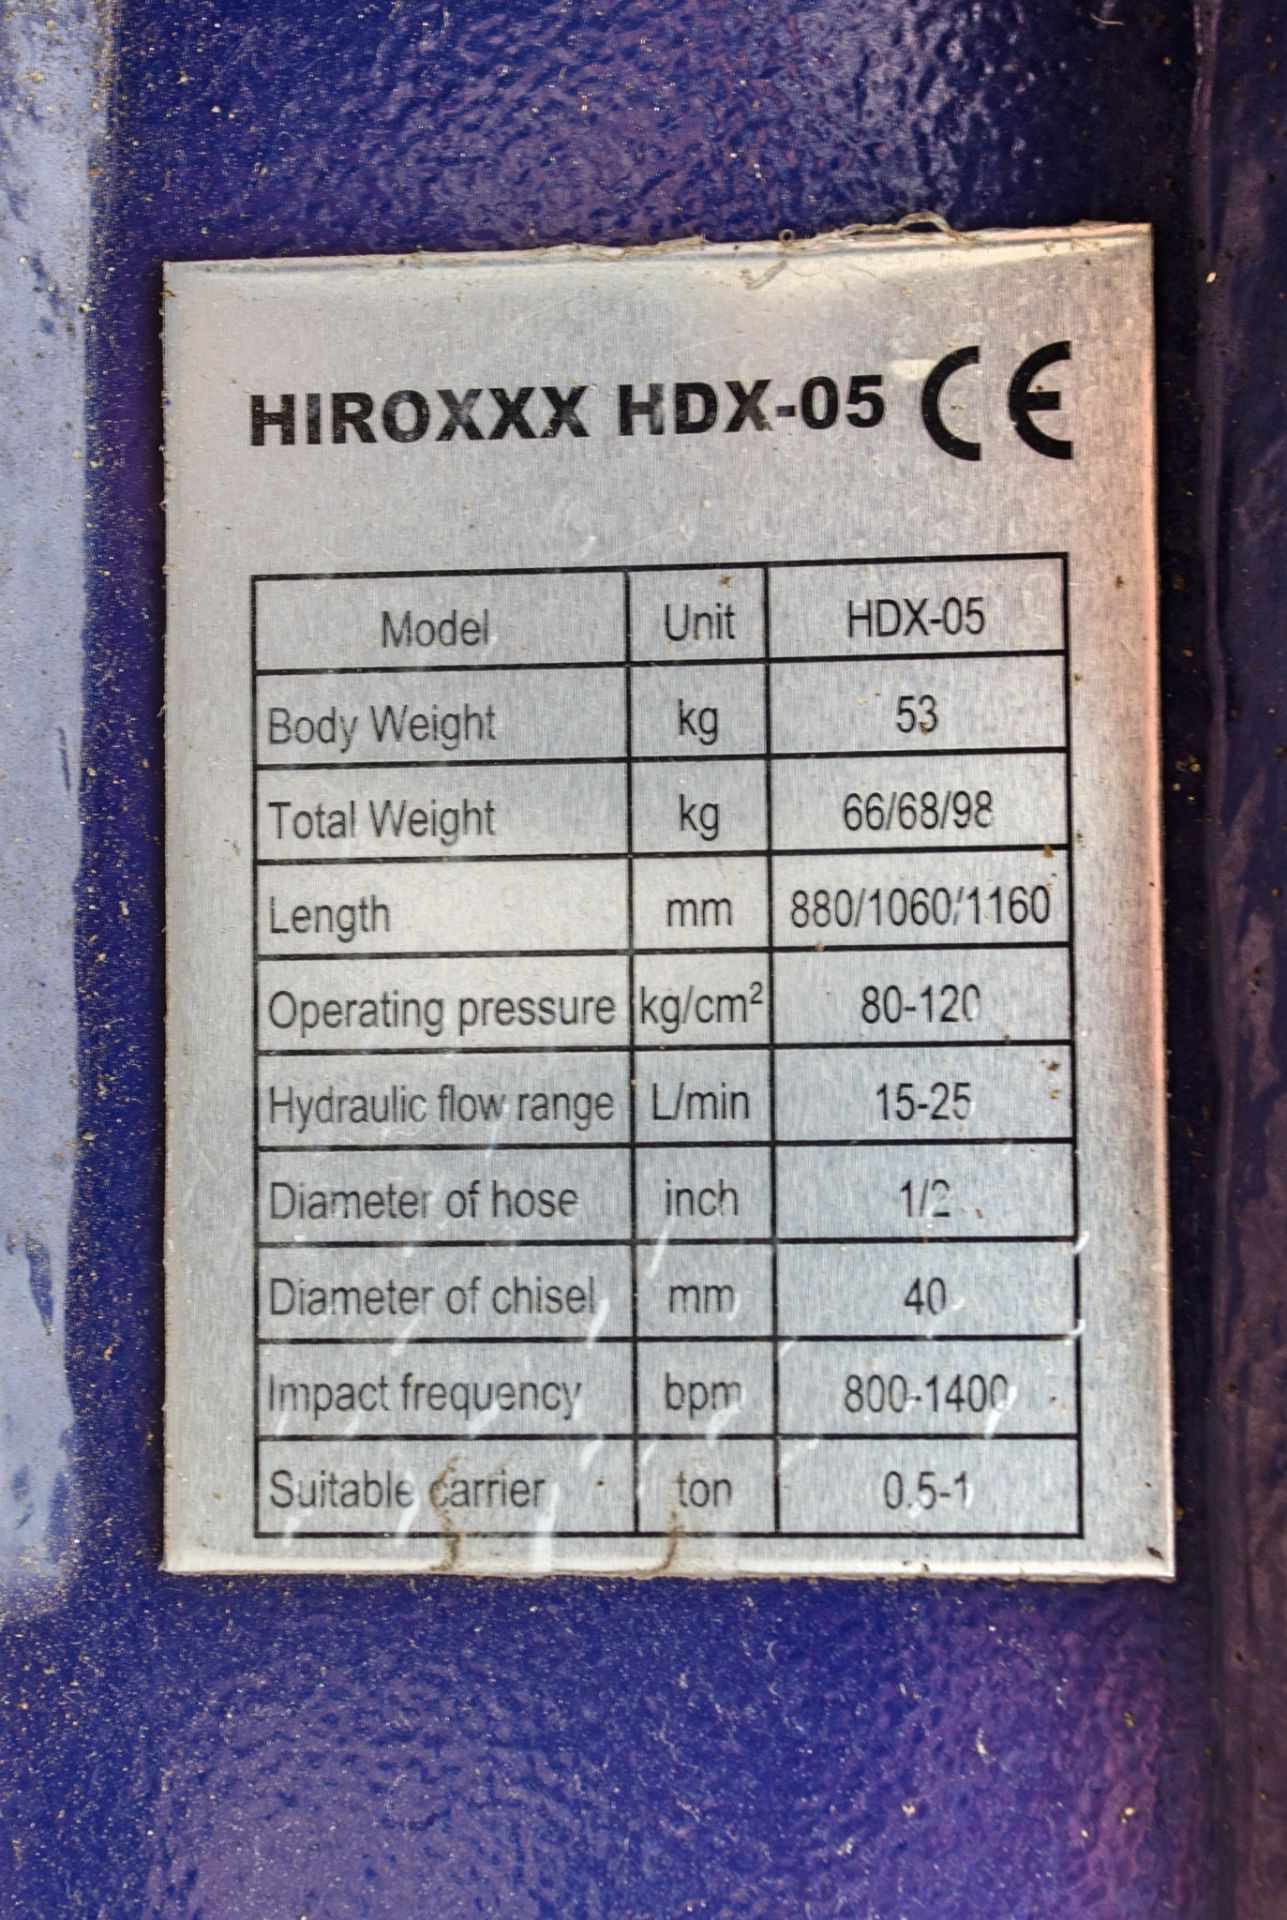 Hirox HDX05 hydraulic breaker to suit 0.5 to 1.5 tonne machine New & Unused - Image 4 of 4